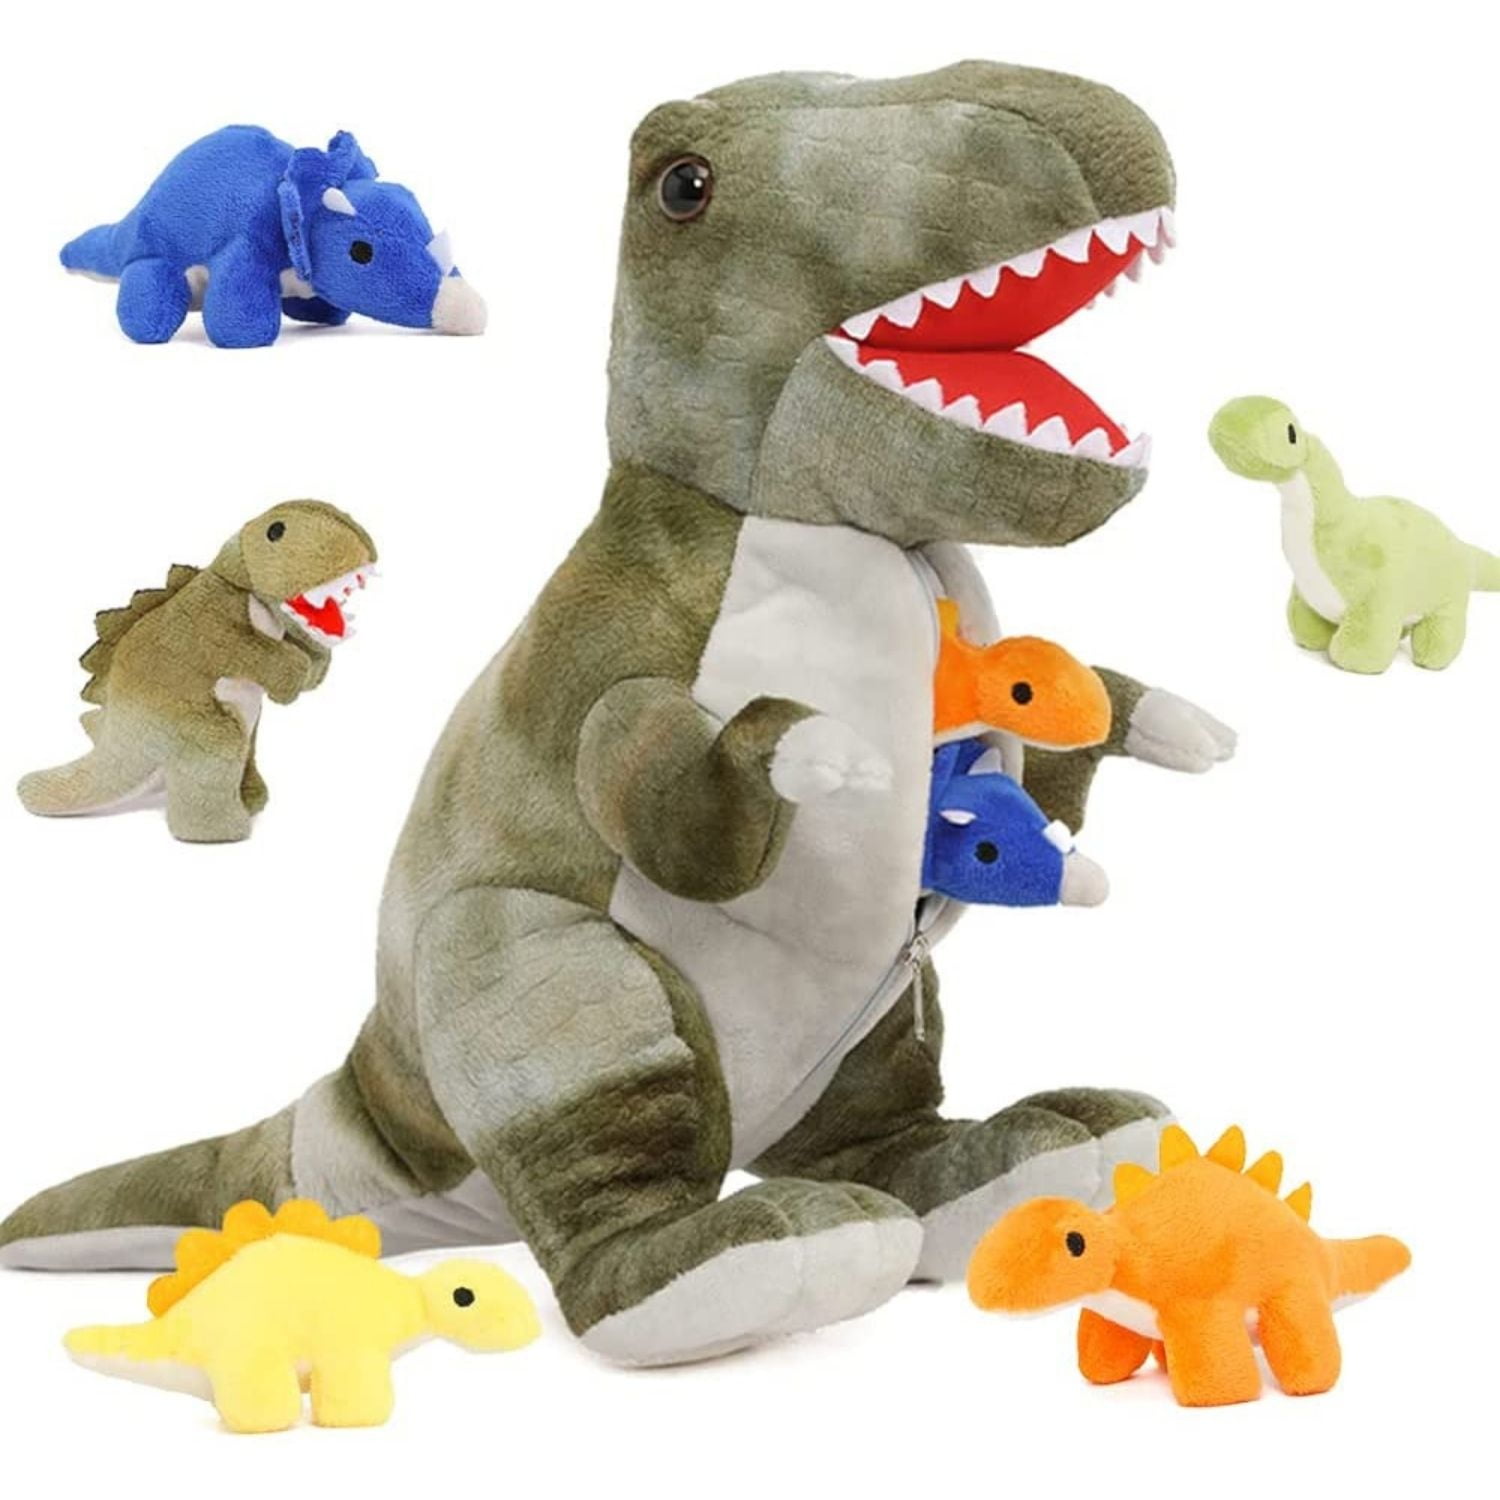 4 Plush Dinosaurs Great for Kids Plush Toys for Toddlers 